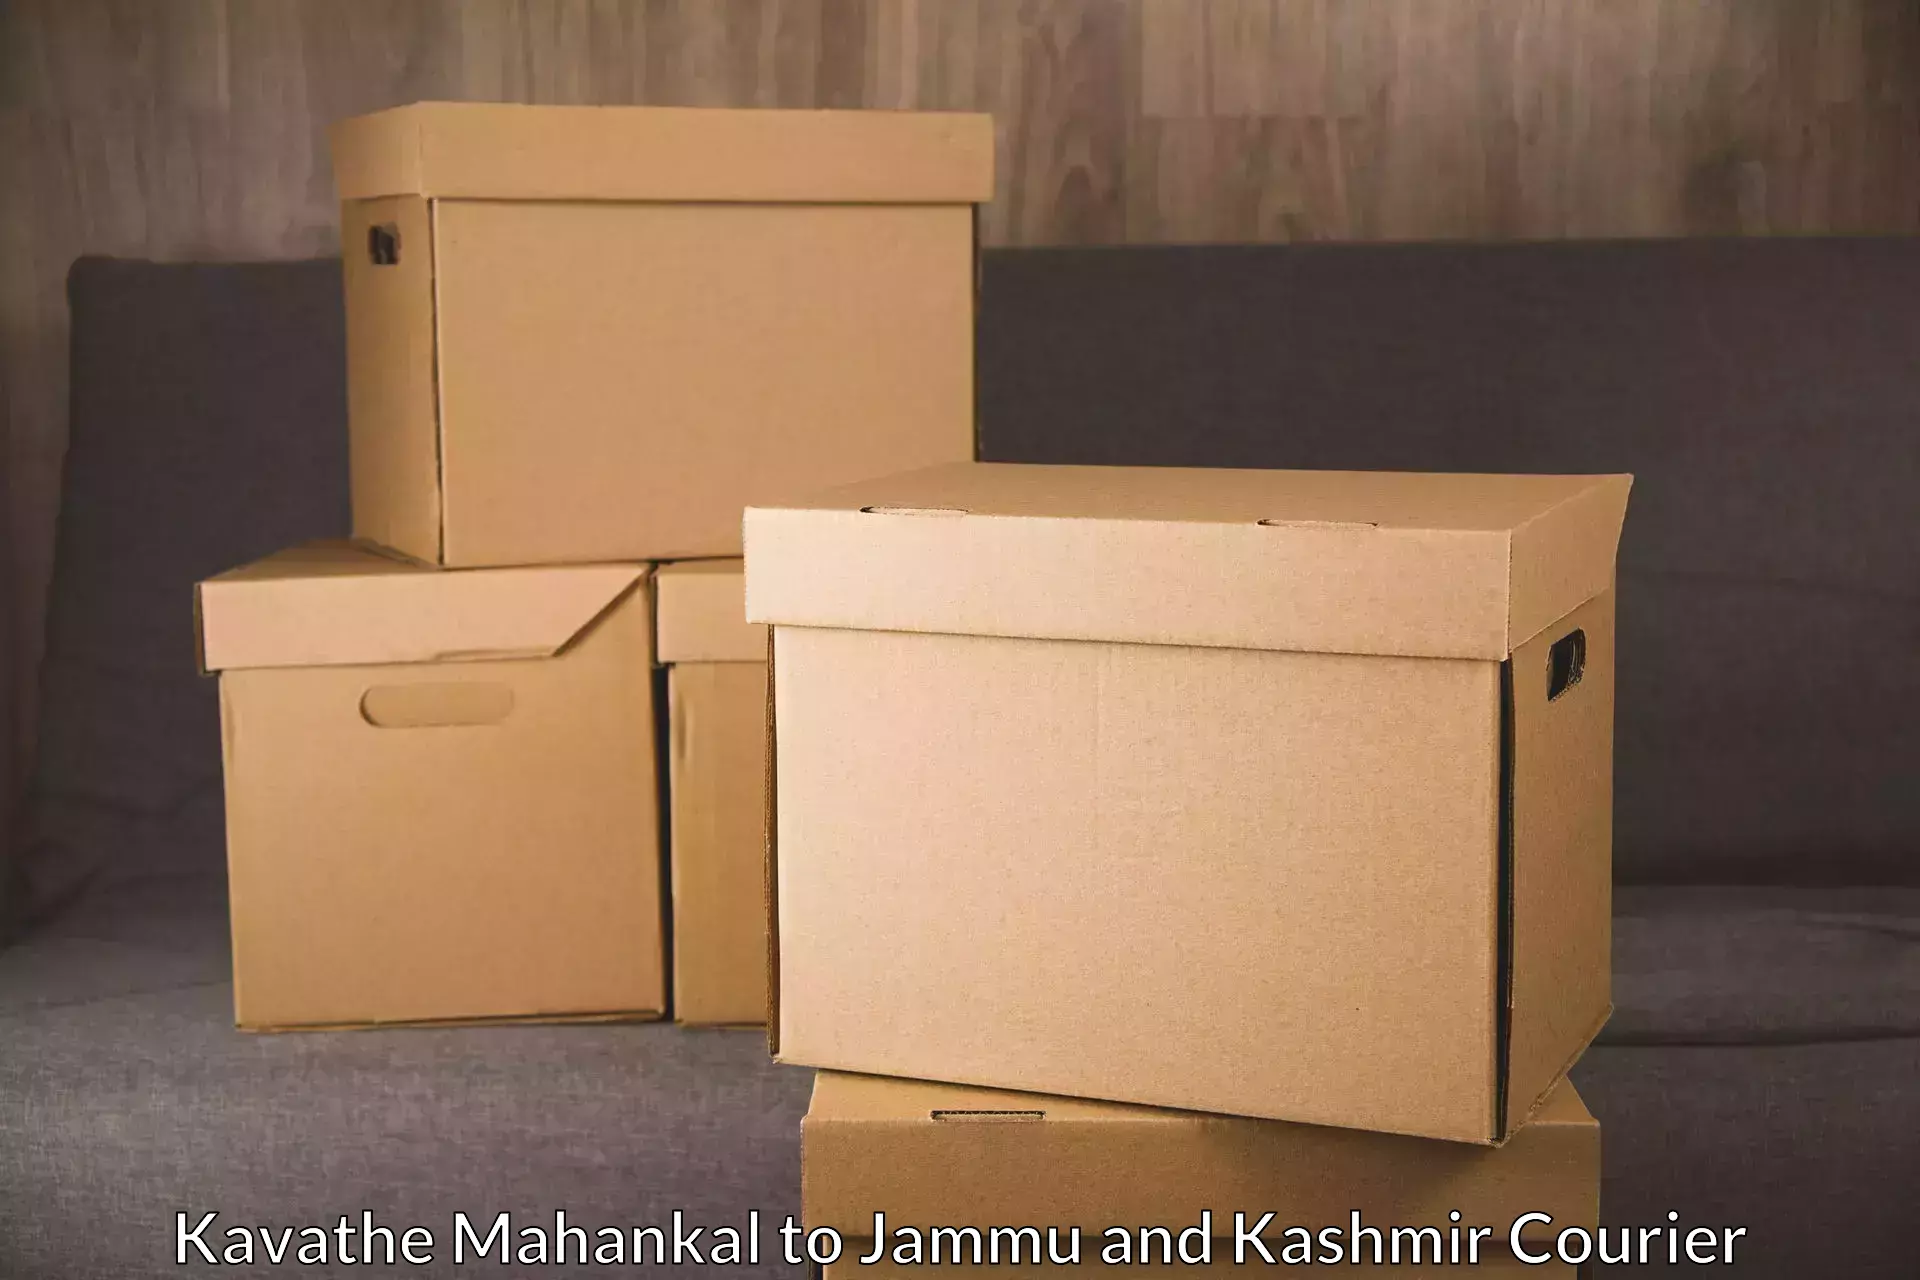 Efficient package consolidation Kavathe Mahankal to Jammu and Kashmir